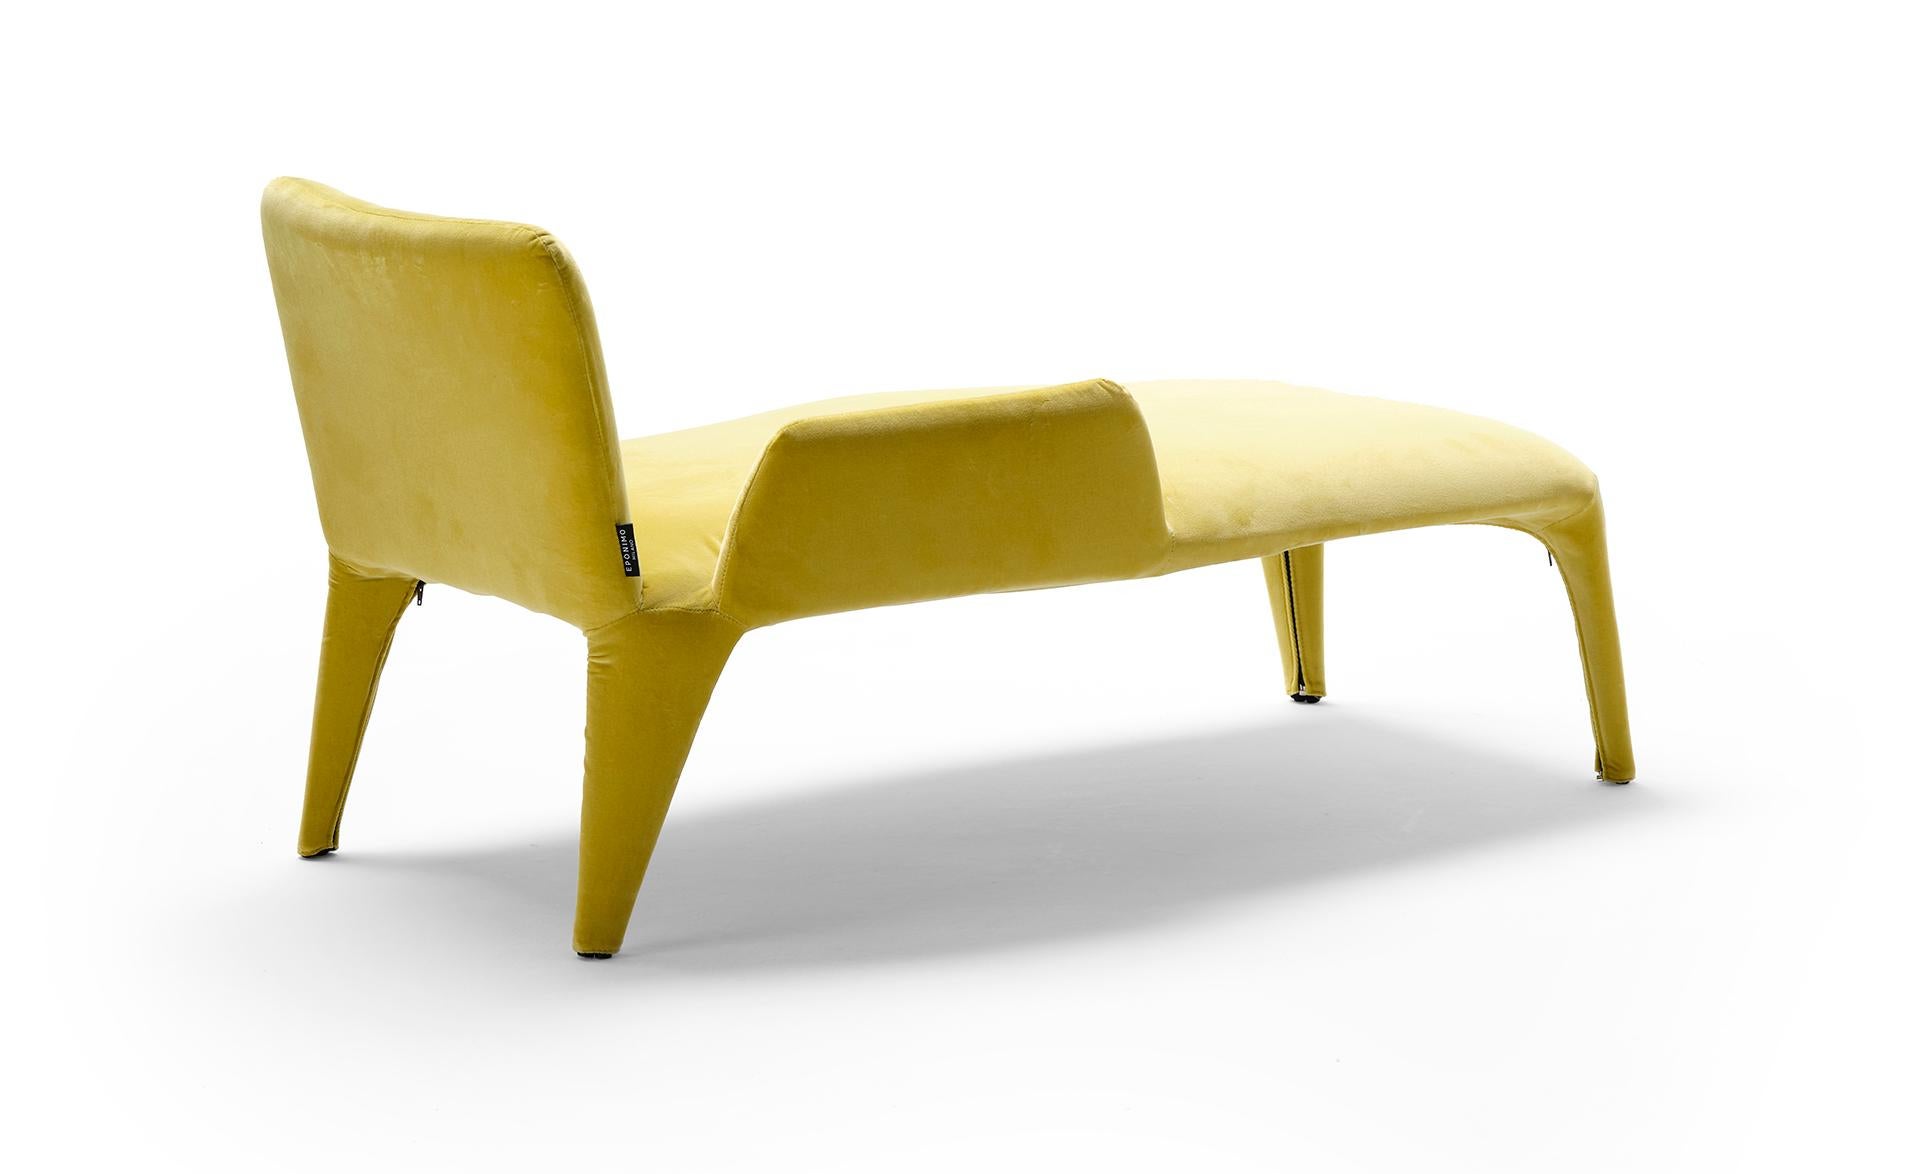 The Nova chaise longue, designed in 2021 for the dressing rooms of the Arcimboldi theatre in Milano, is a compact but theatrical piece that easily finds its place in any environment. It has a precious look but it is light-weight and it features a